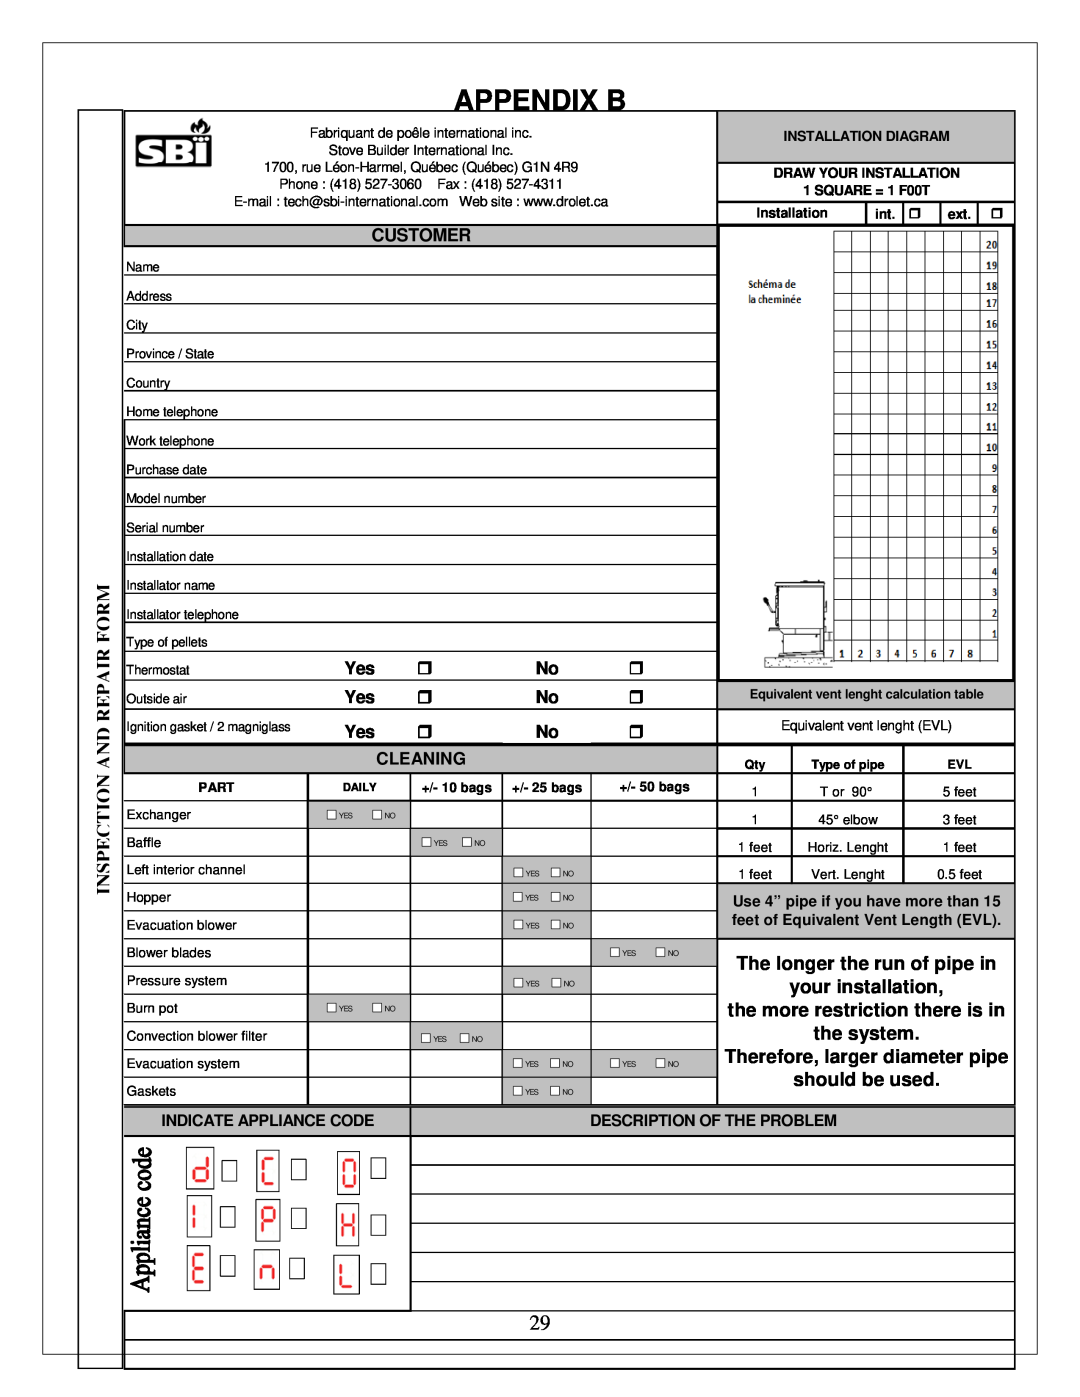 Drolet ECO-35 Appendix B, Inspection And Repair Form, Customer, your installation, the more restriction there is in 